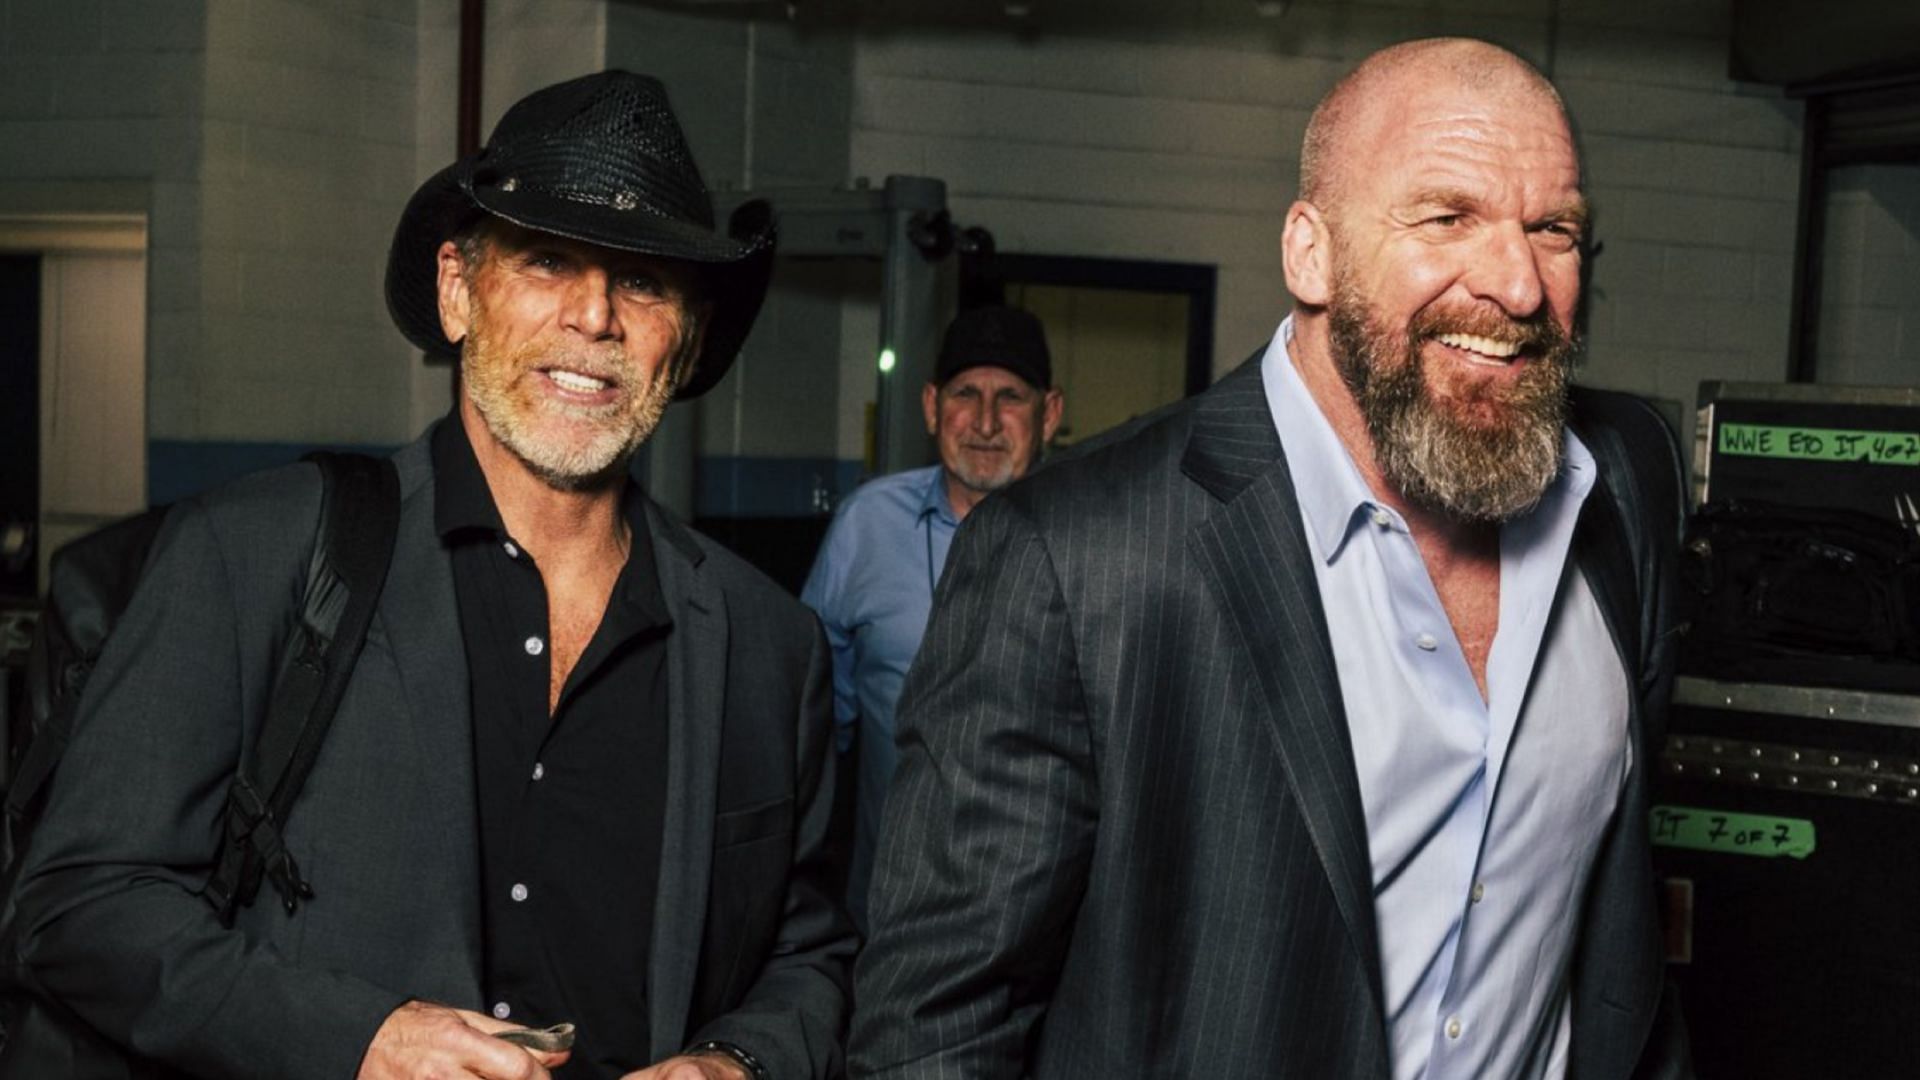 Shawn Michaels and Triple H backstage at the WWE Royal Rumble